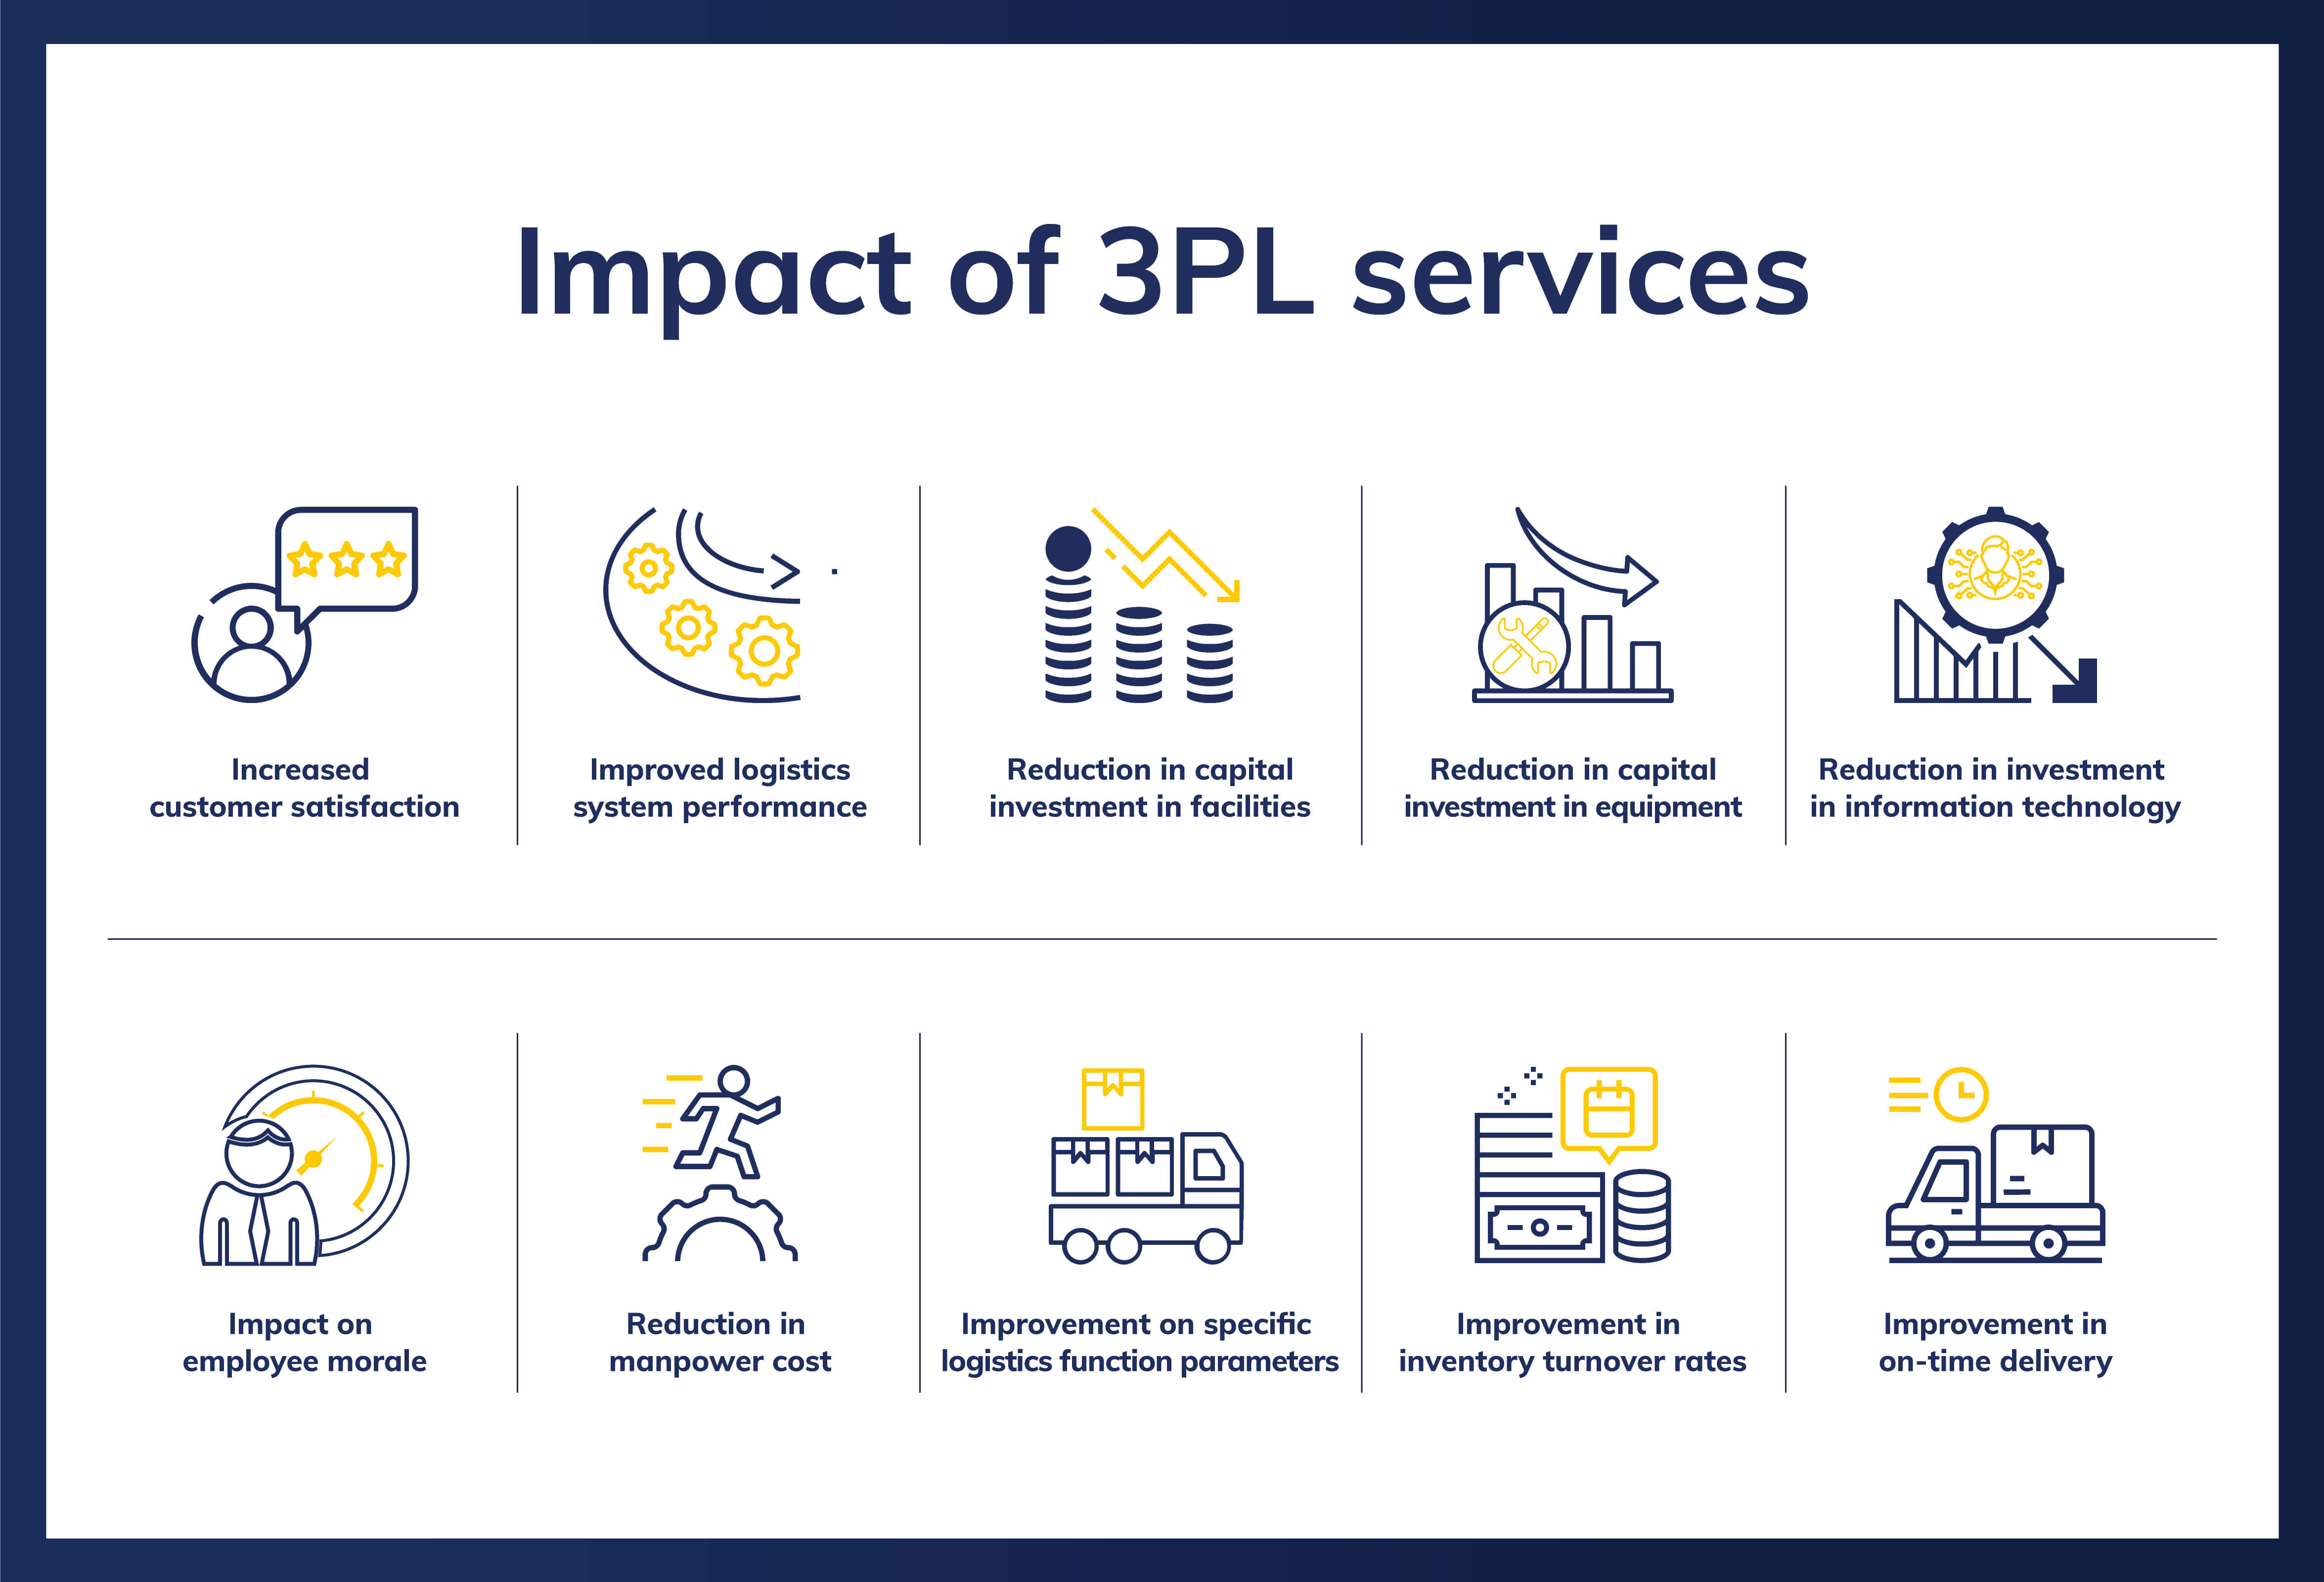 Image of 3PL services 